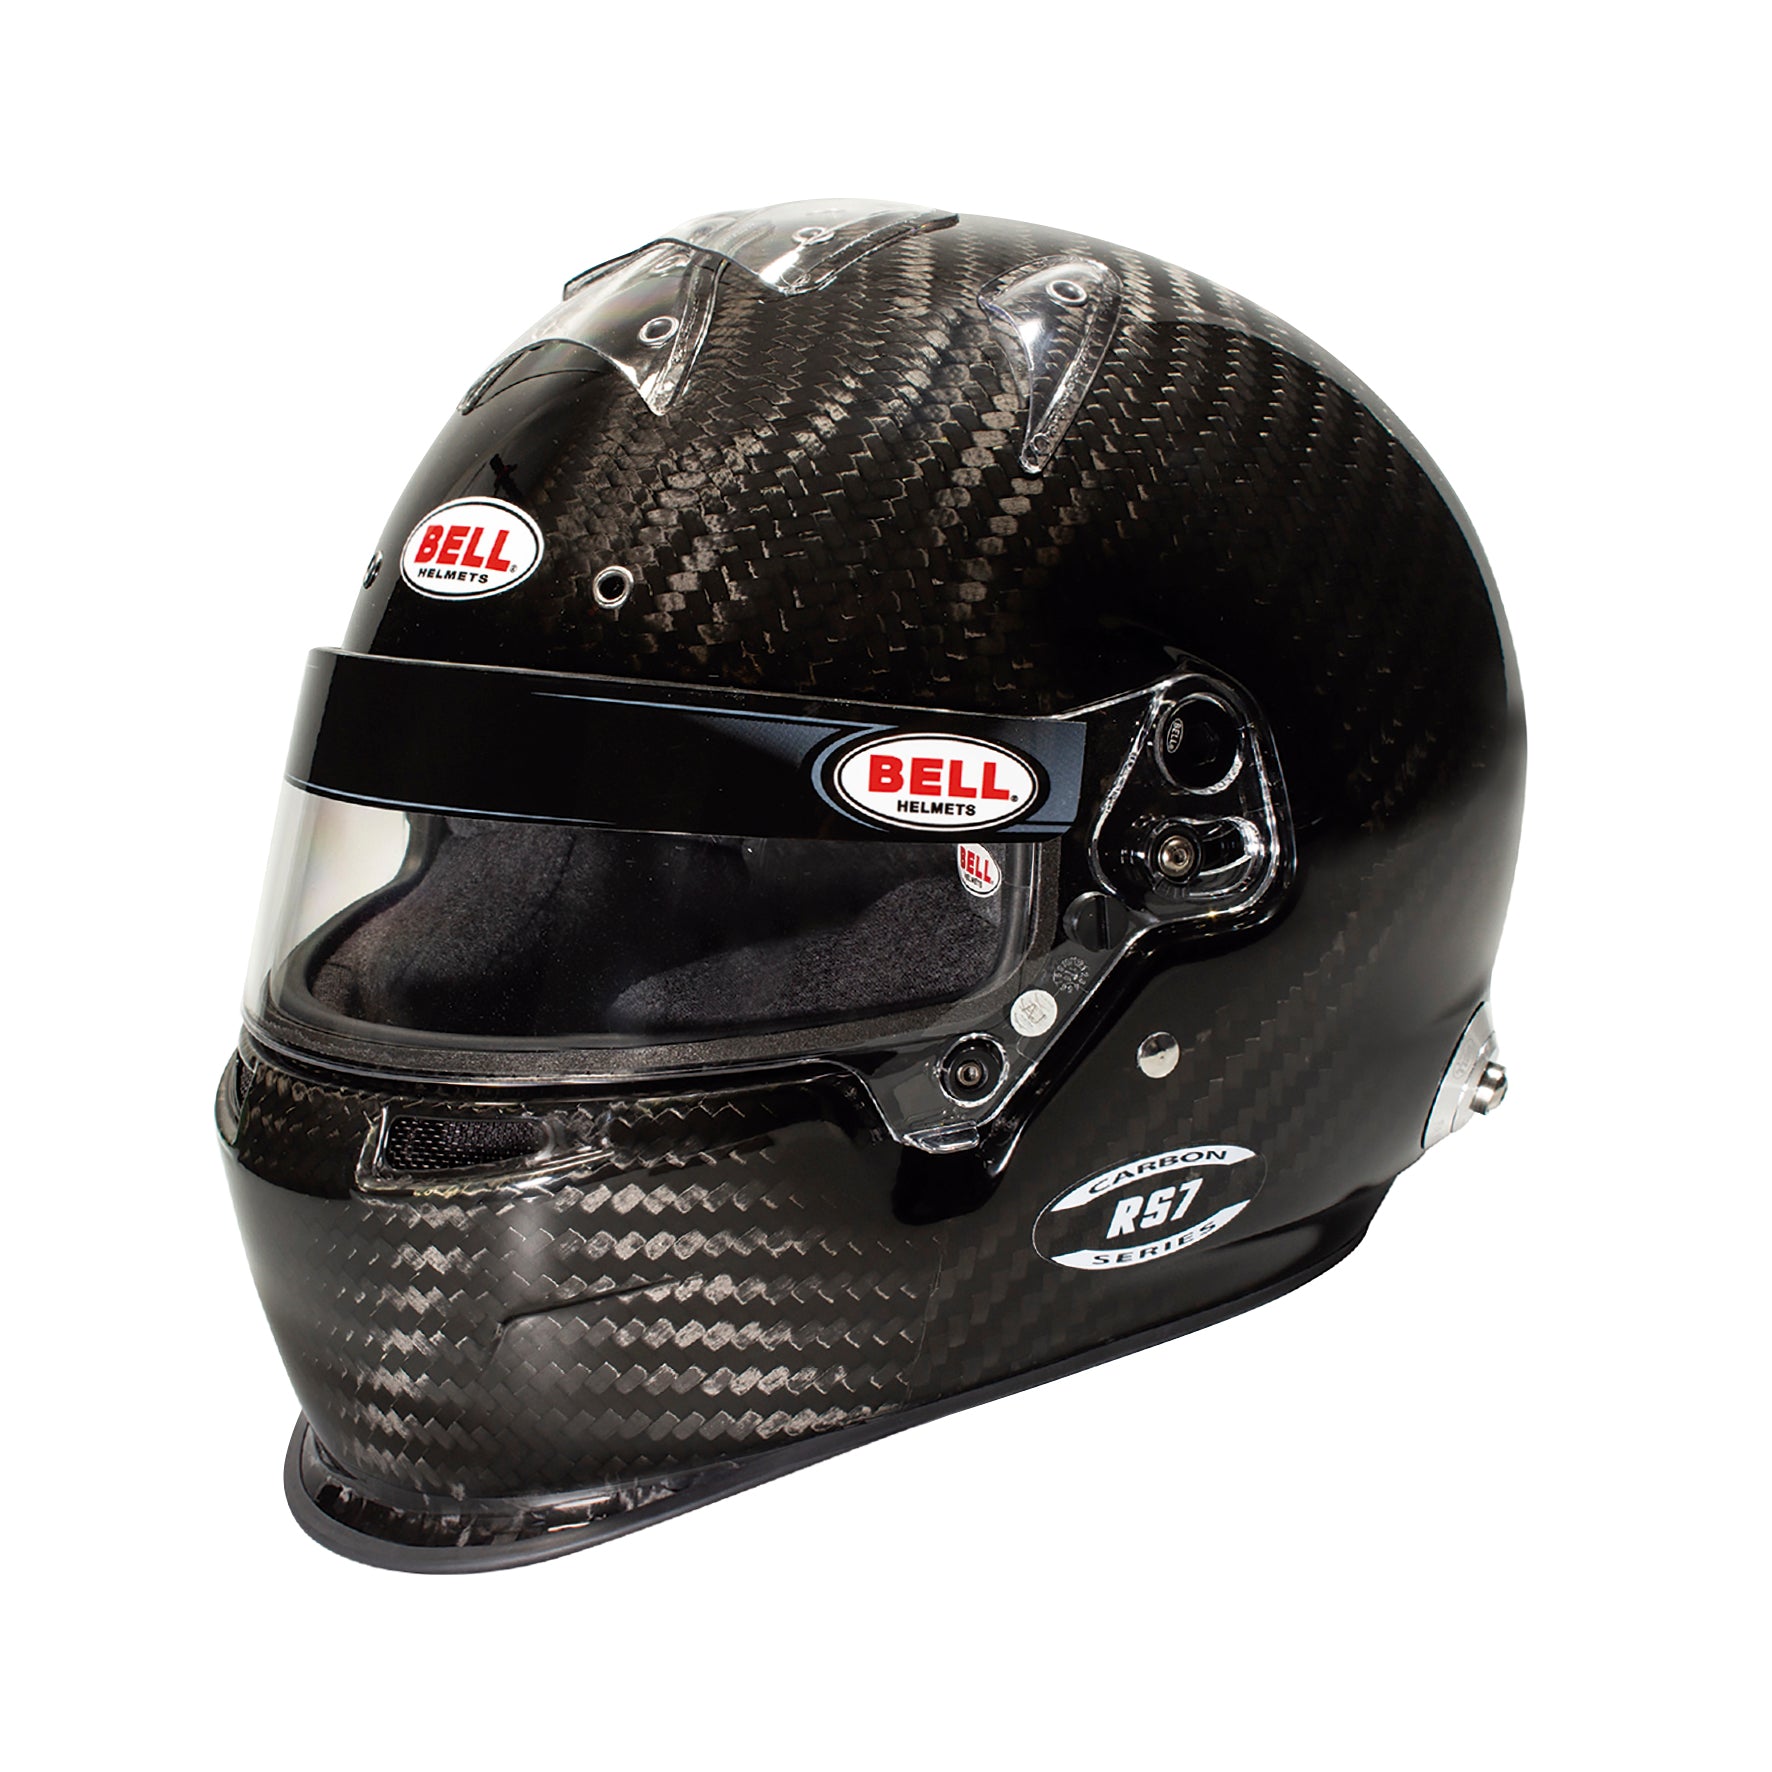 BELL 1204A06 Шолом full face RS7 CARBON DUCKBILL, HANS, FIA, size 57 (7 1/8) Photo-1 